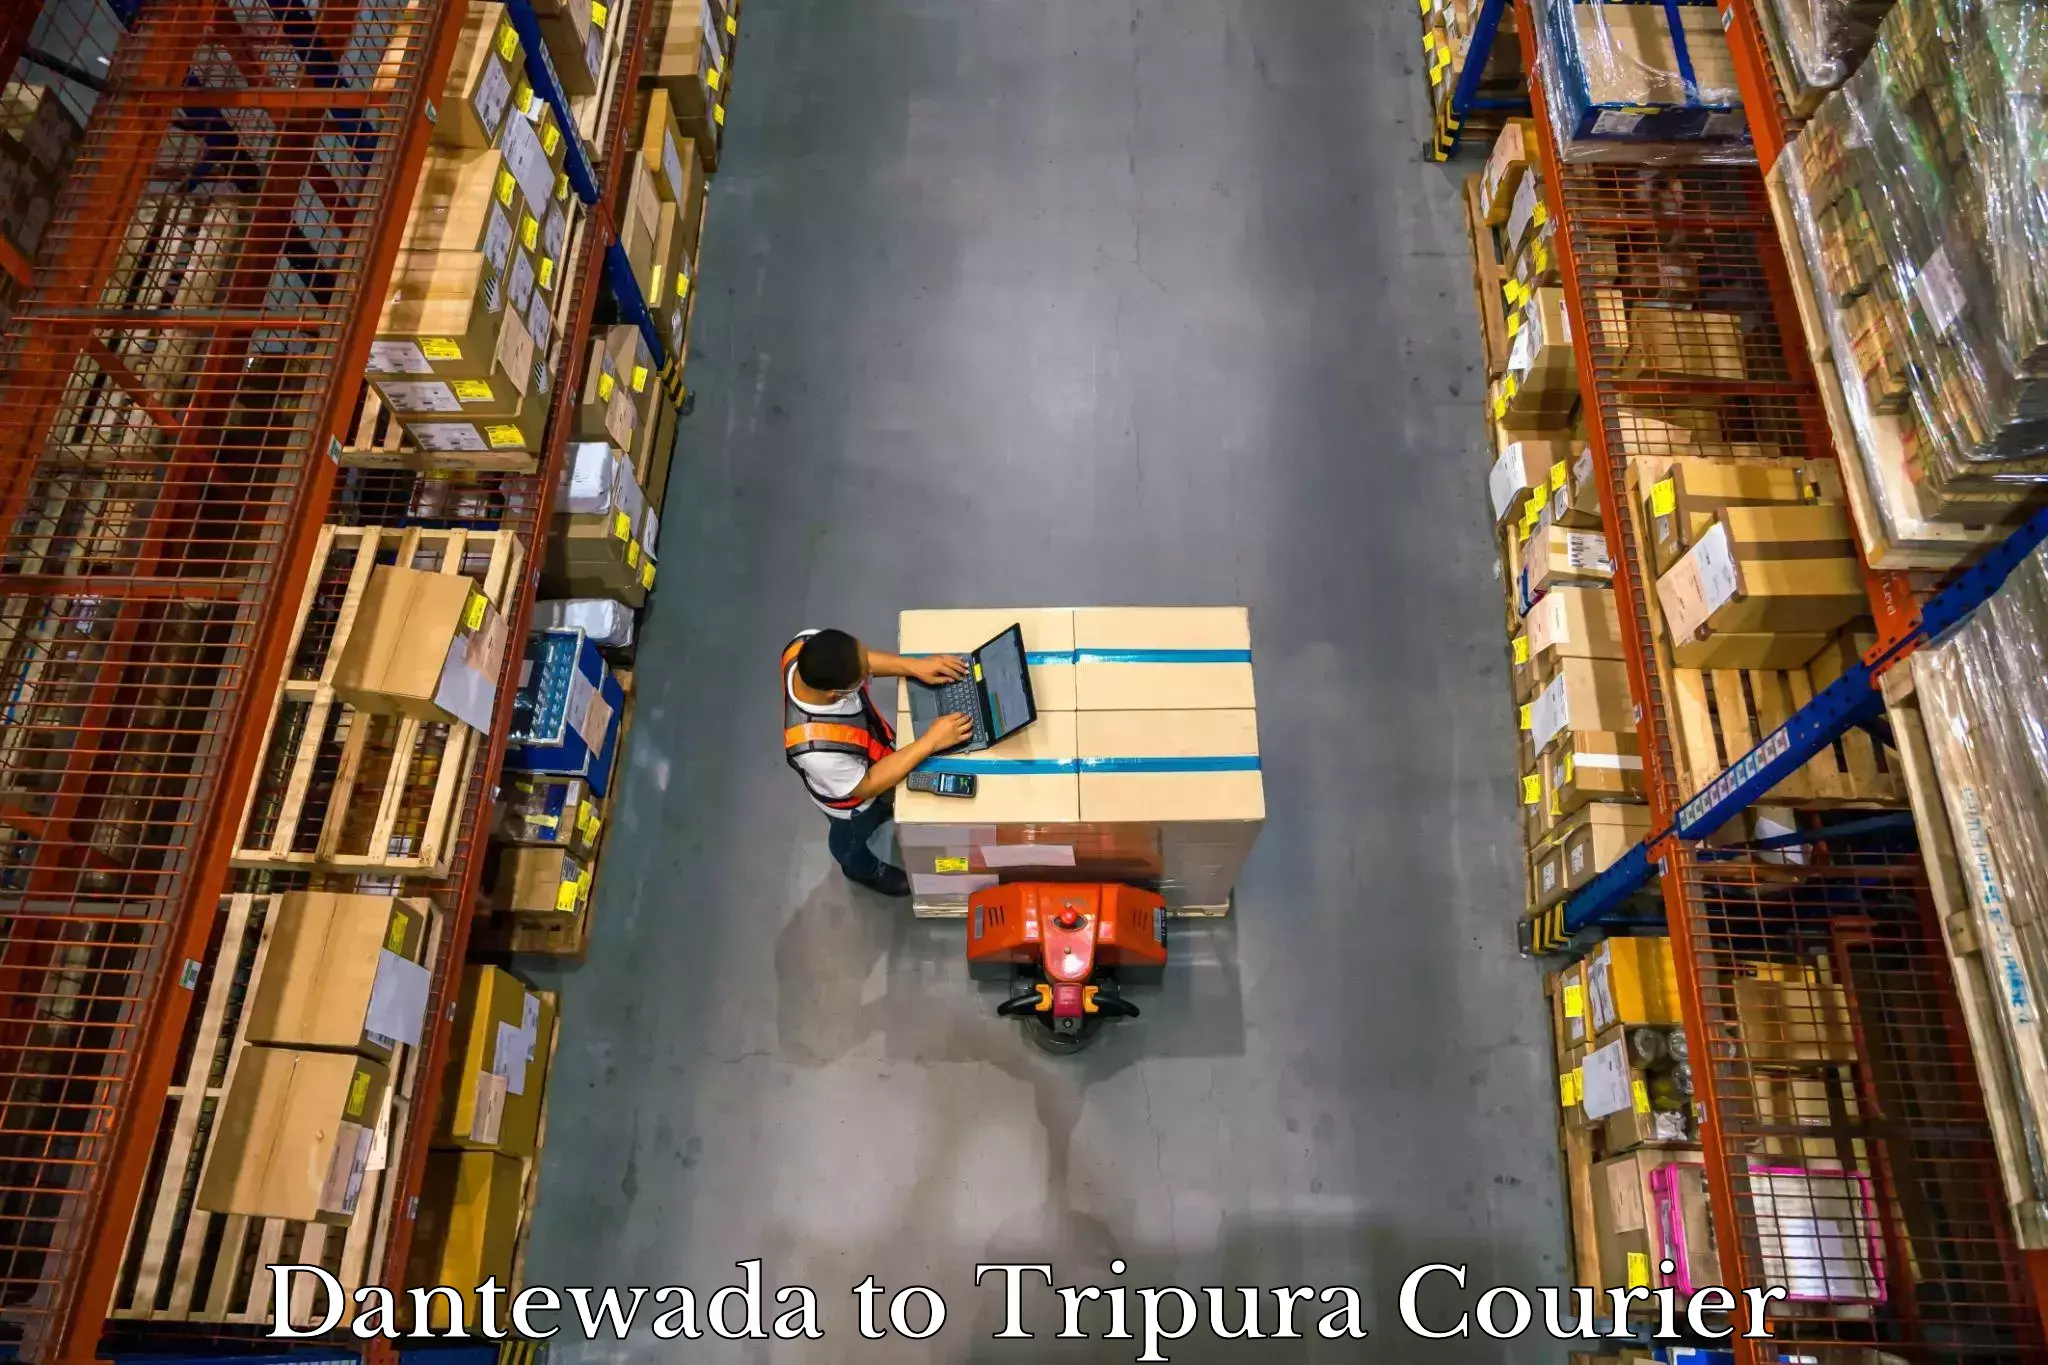 Express luggage delivery in Dantewada to Udaipur Tripura